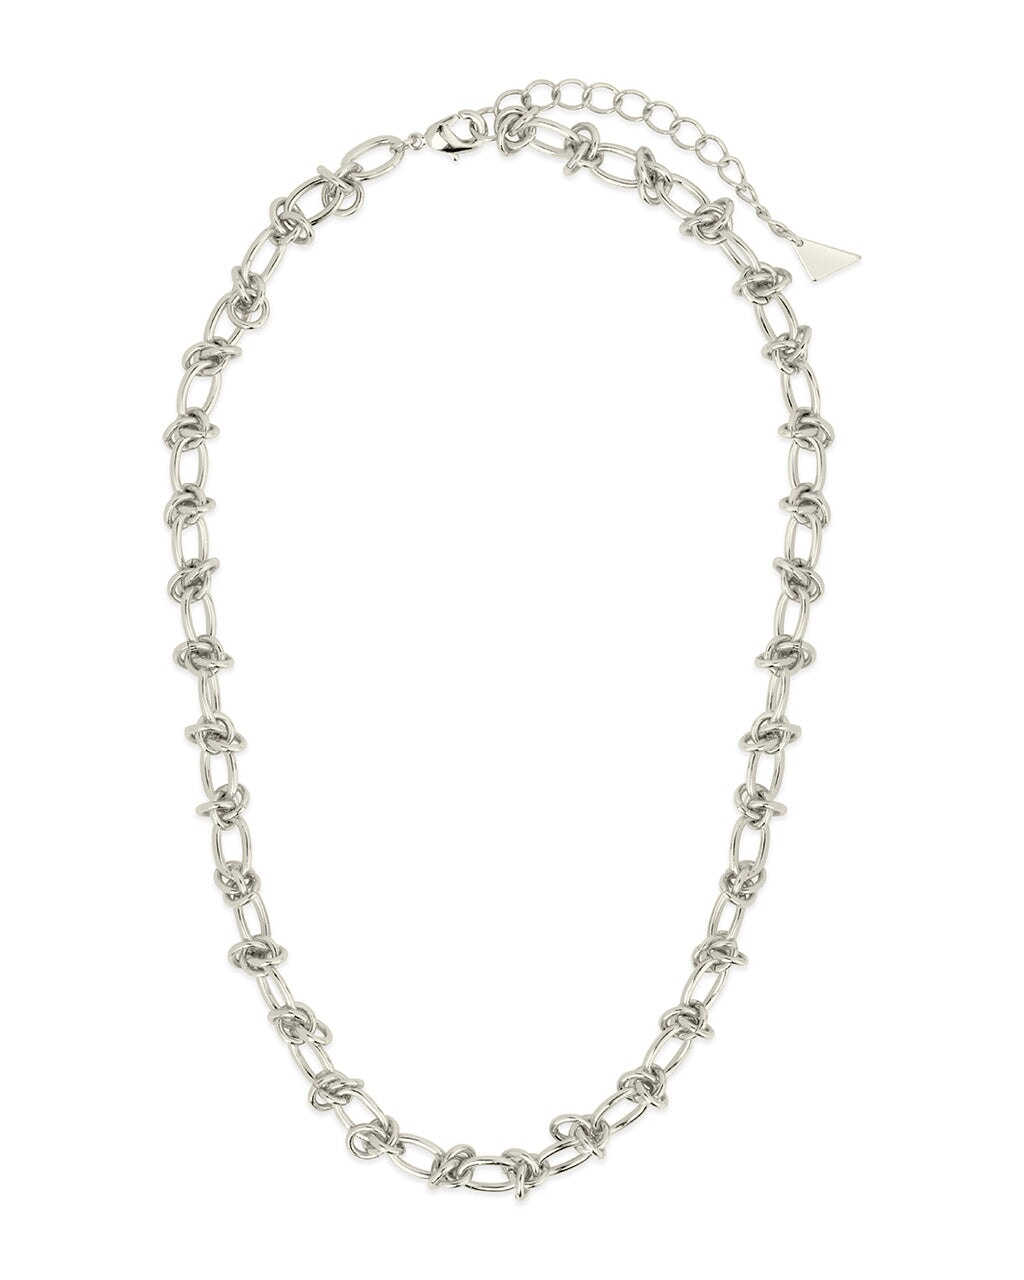 Zoya Chain Necklace Necklace Sterling Forever 